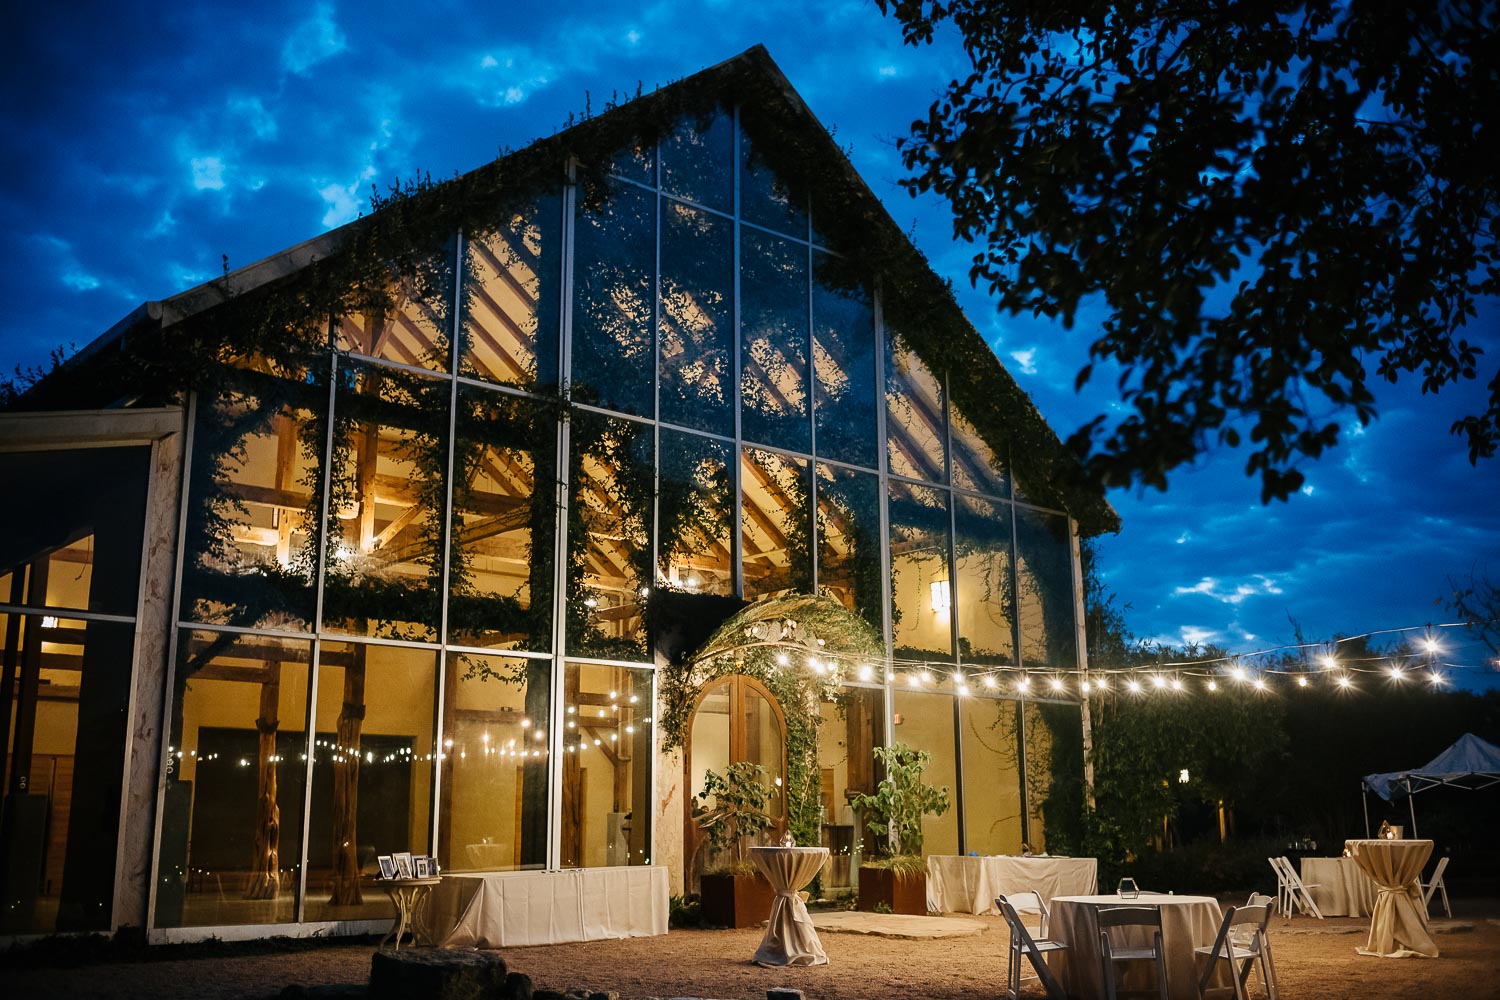 A twilight shot of the Glass Ballroom at Barr Mansion, Texas